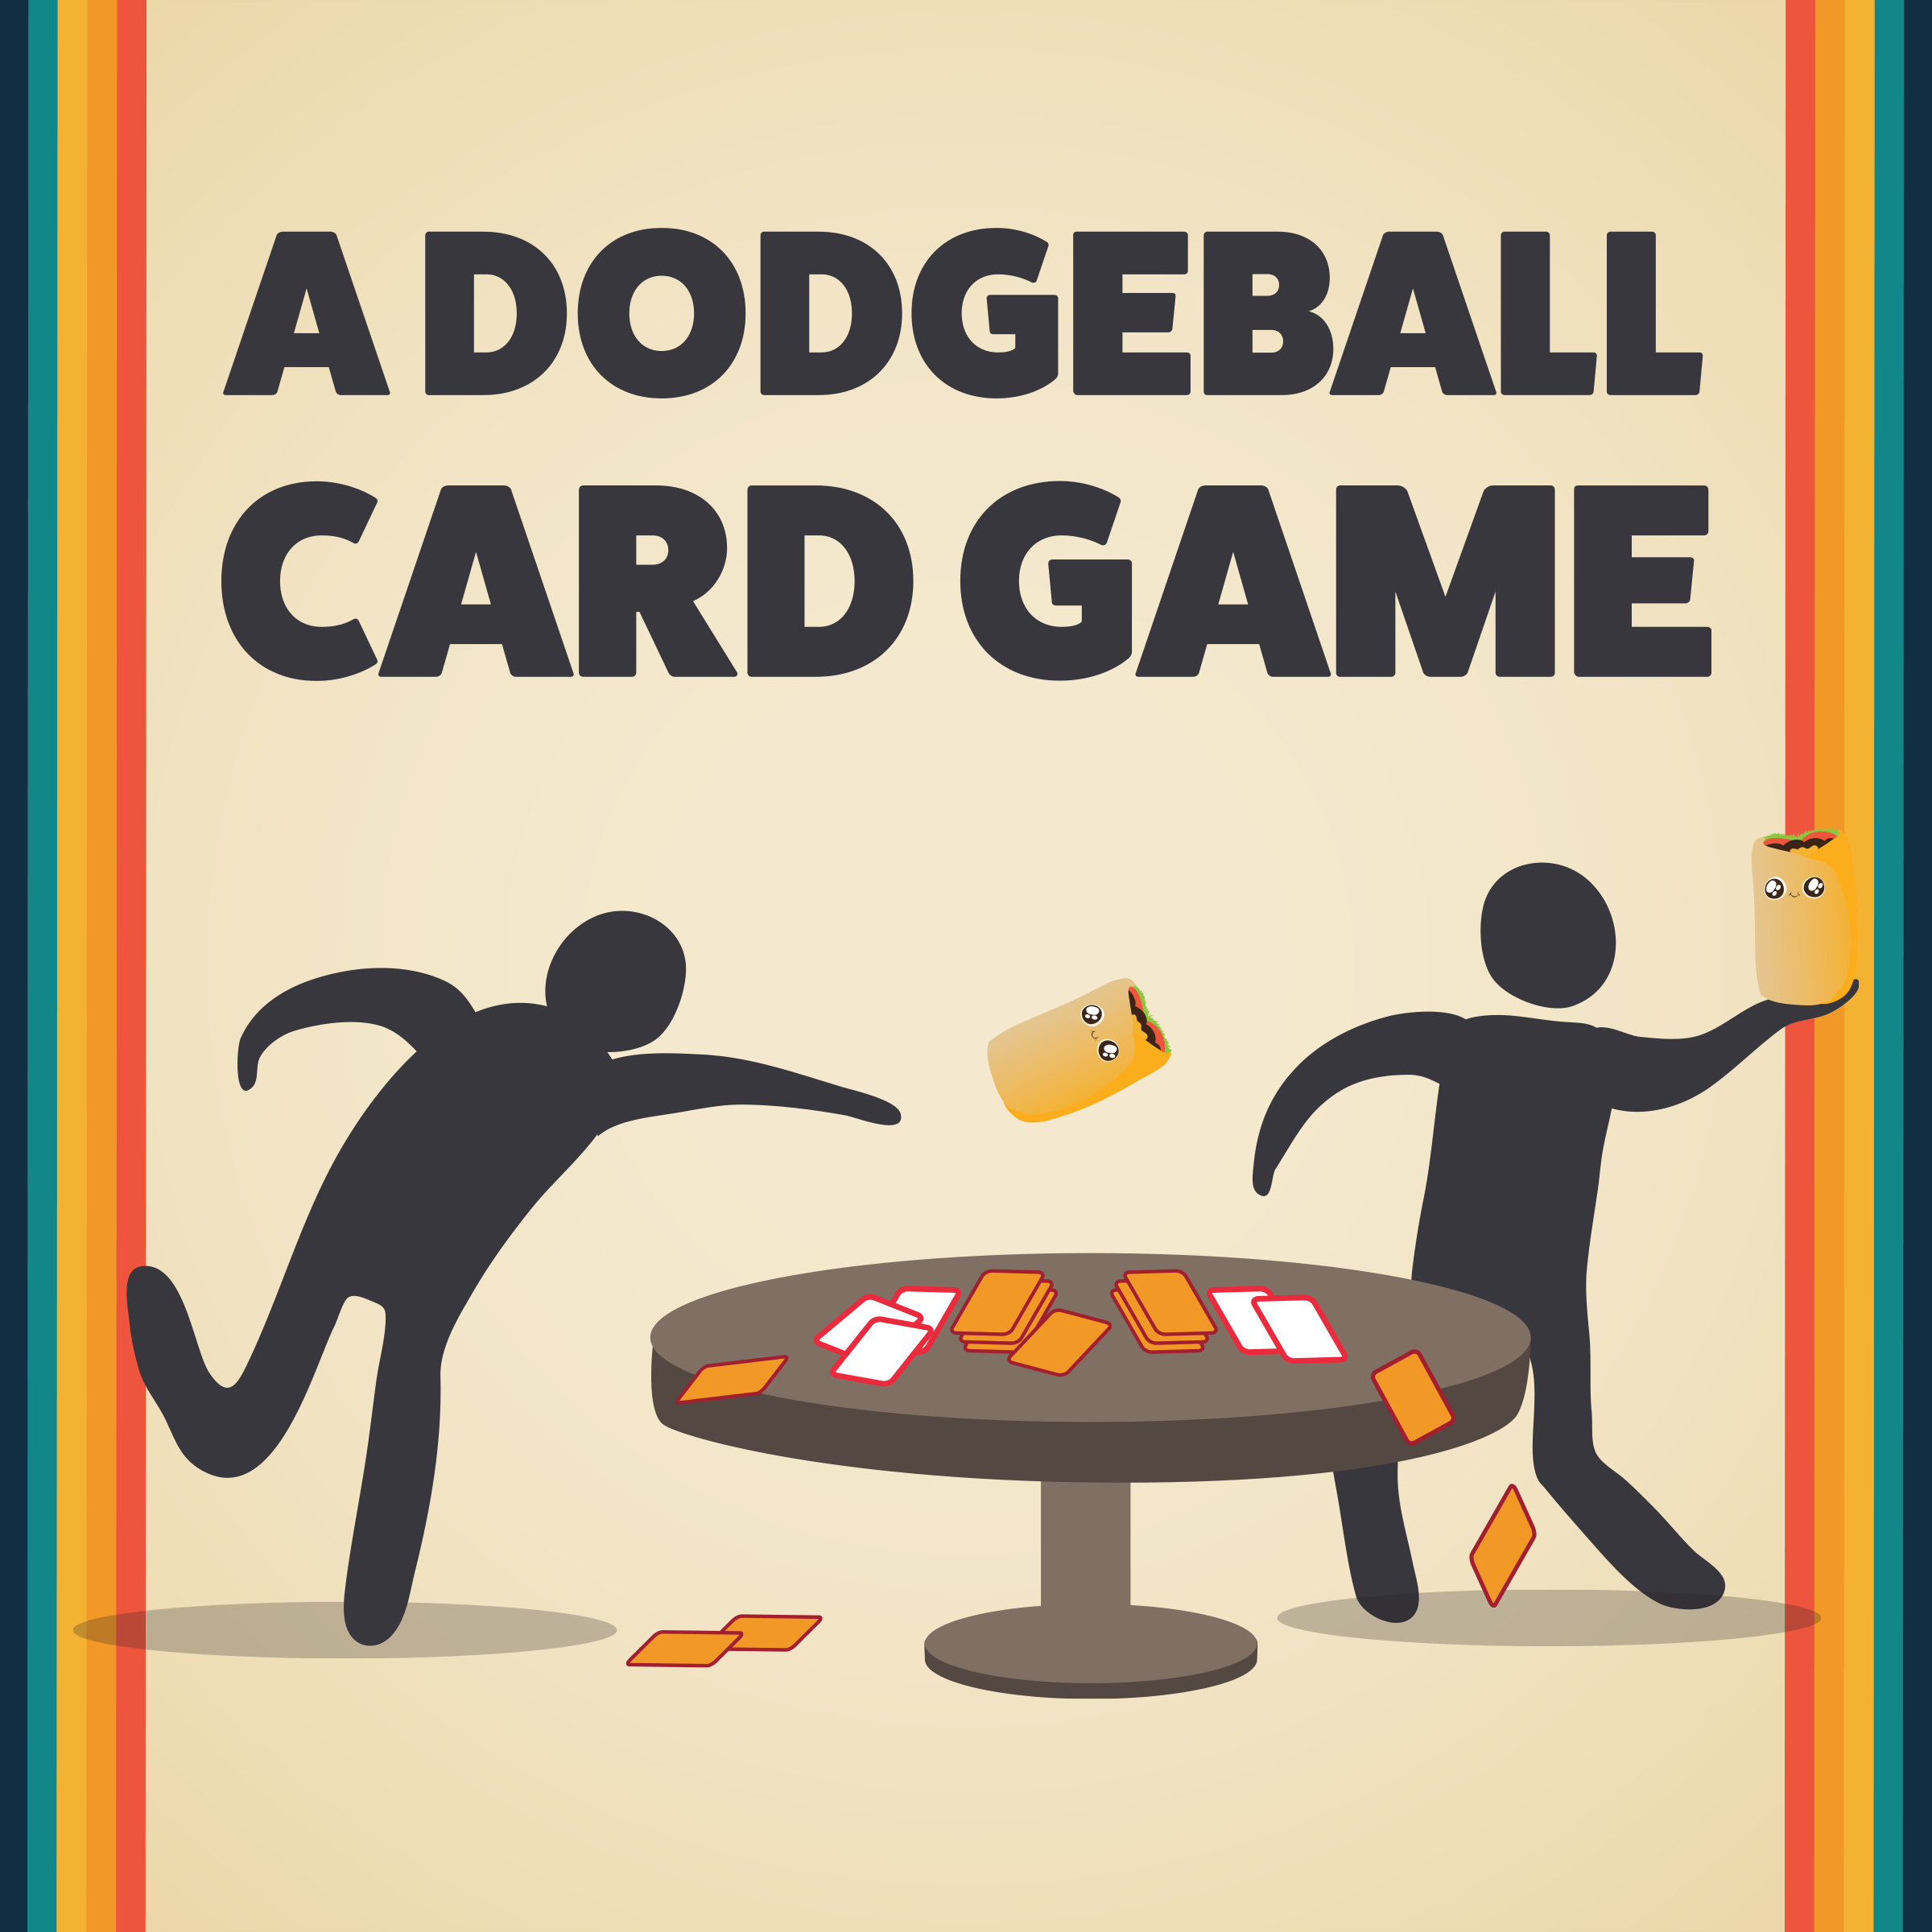 Throw Throw Burrito by Exploding Kittens - A Dodgeball Card Game - Family-Friendly Party Games - for Adults, Teens & Kids - 2-6 Players - image 4 of 6